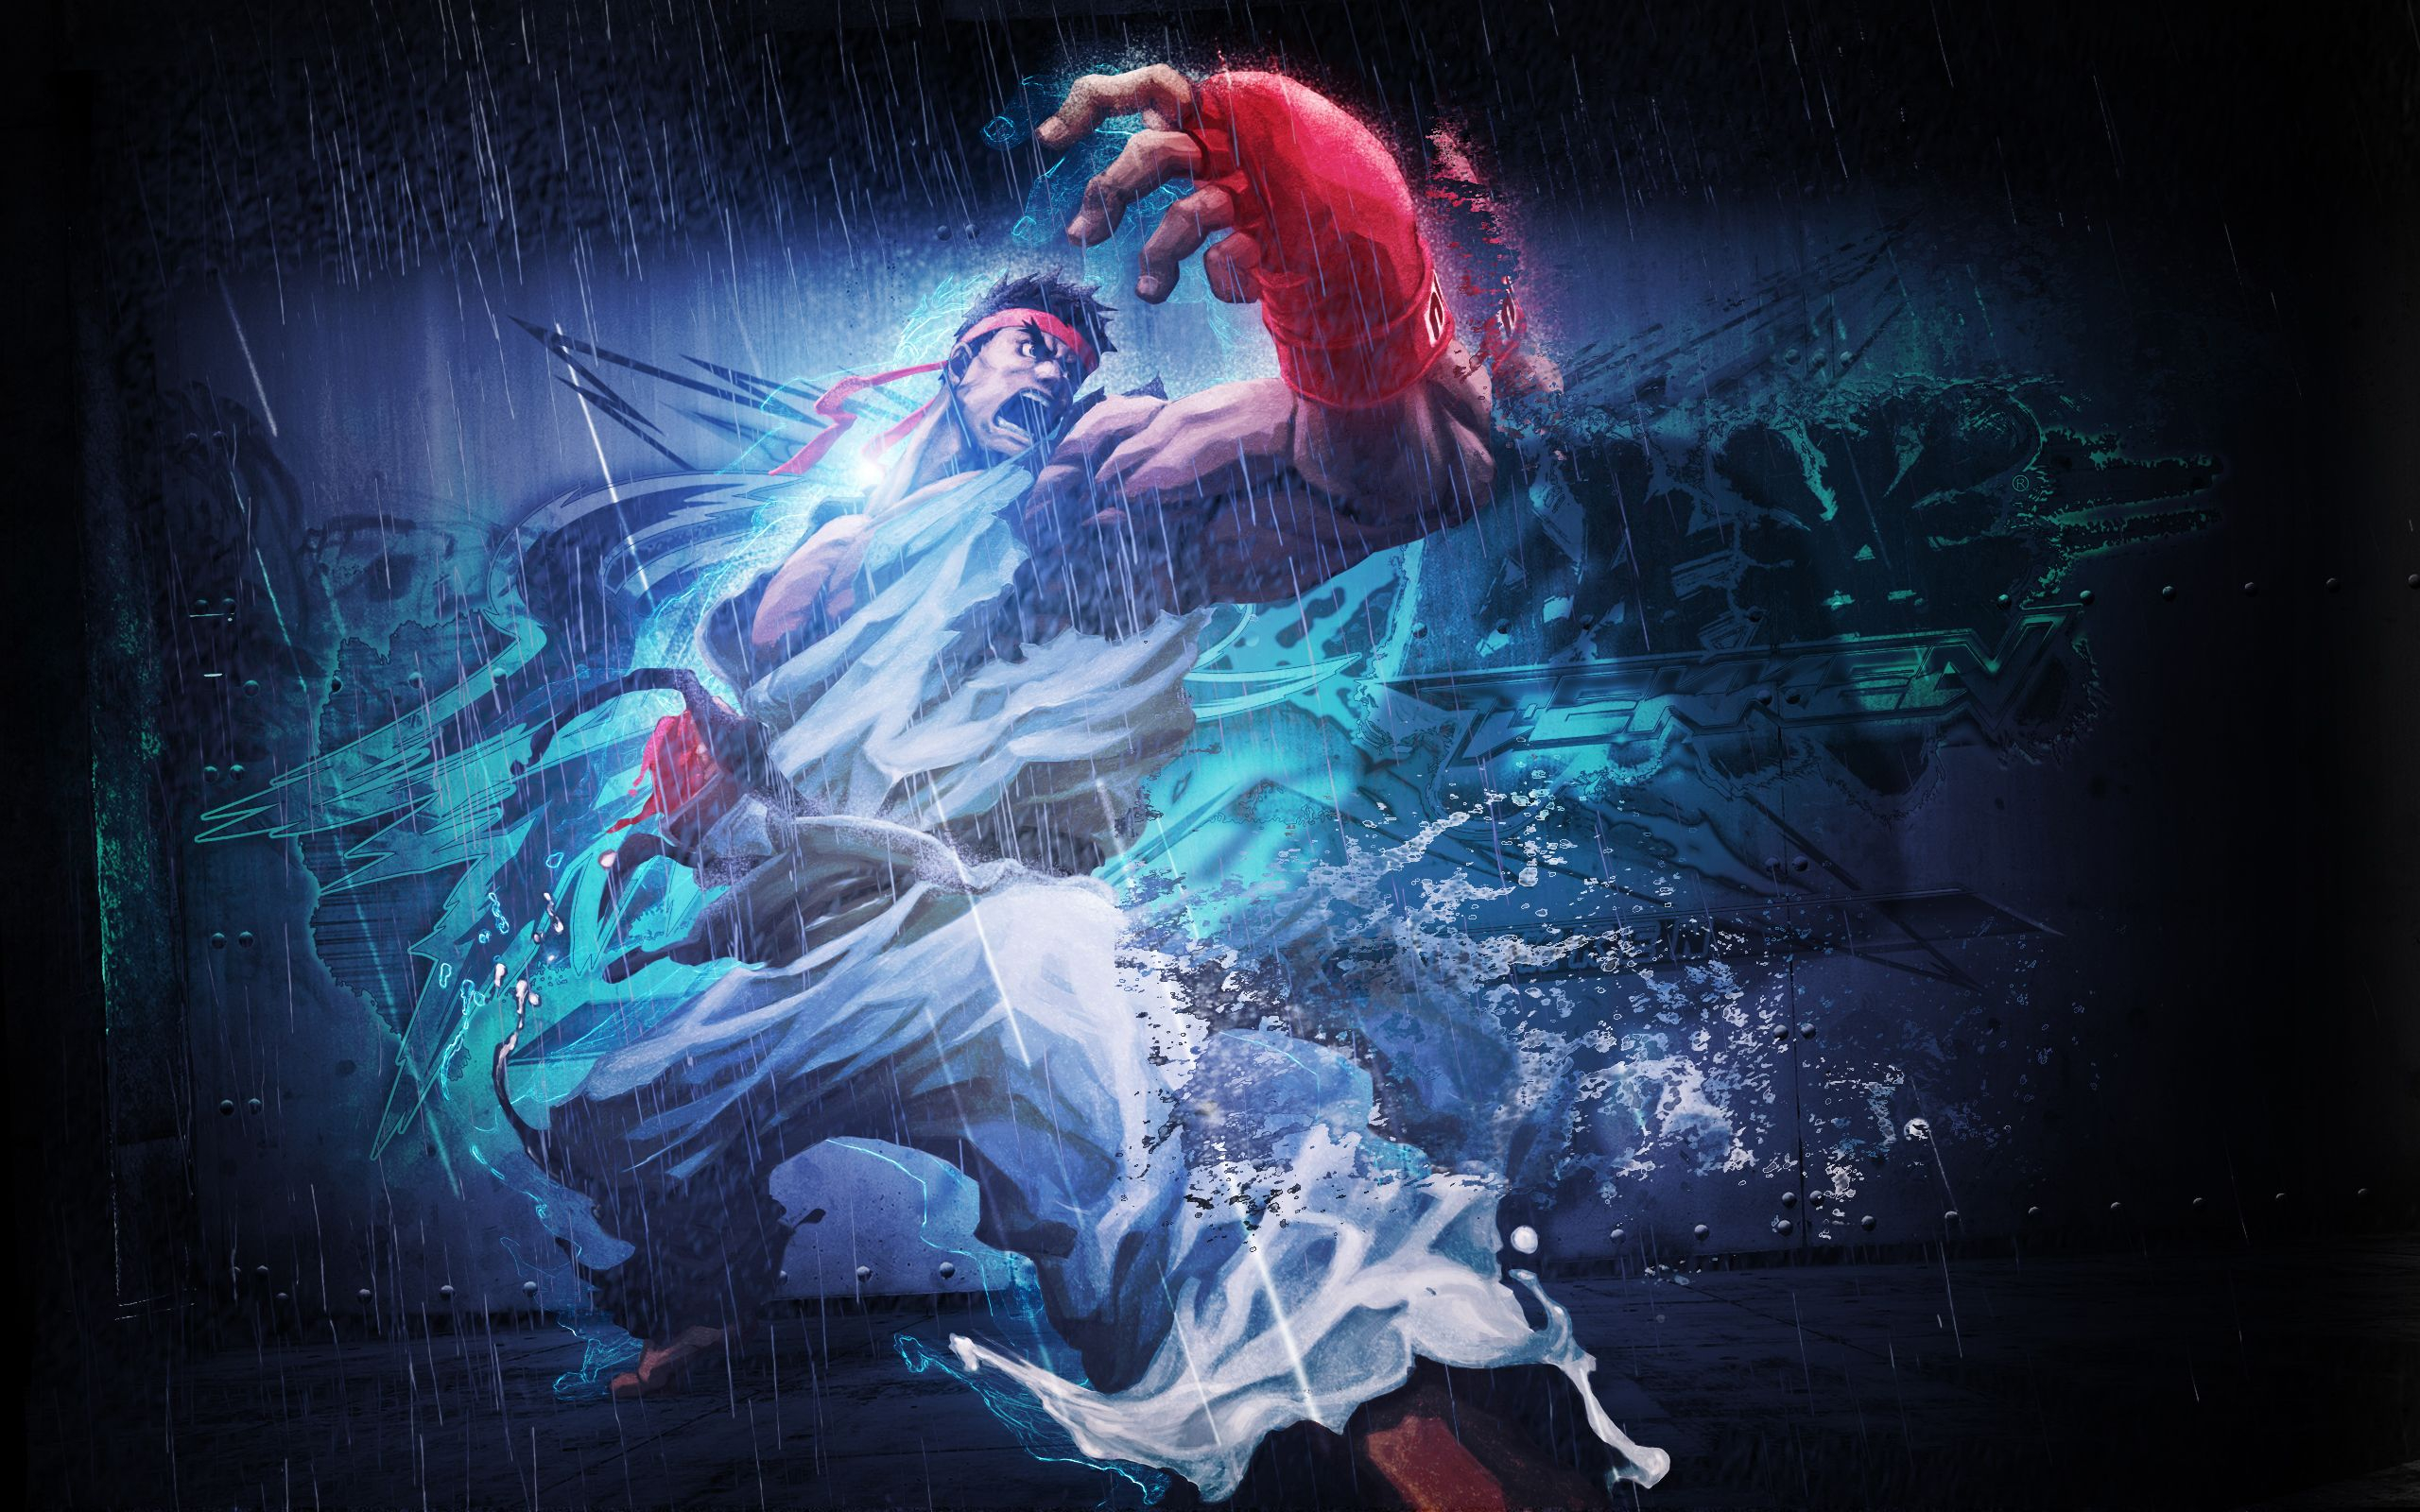 2560x1600 HD Ryu in The Street Fighter Wallpaper Background Free Download &acirc;&#128;&#147; 10856 | Street fighter wallpaper, Ryu street fighter, Street fighter tekke